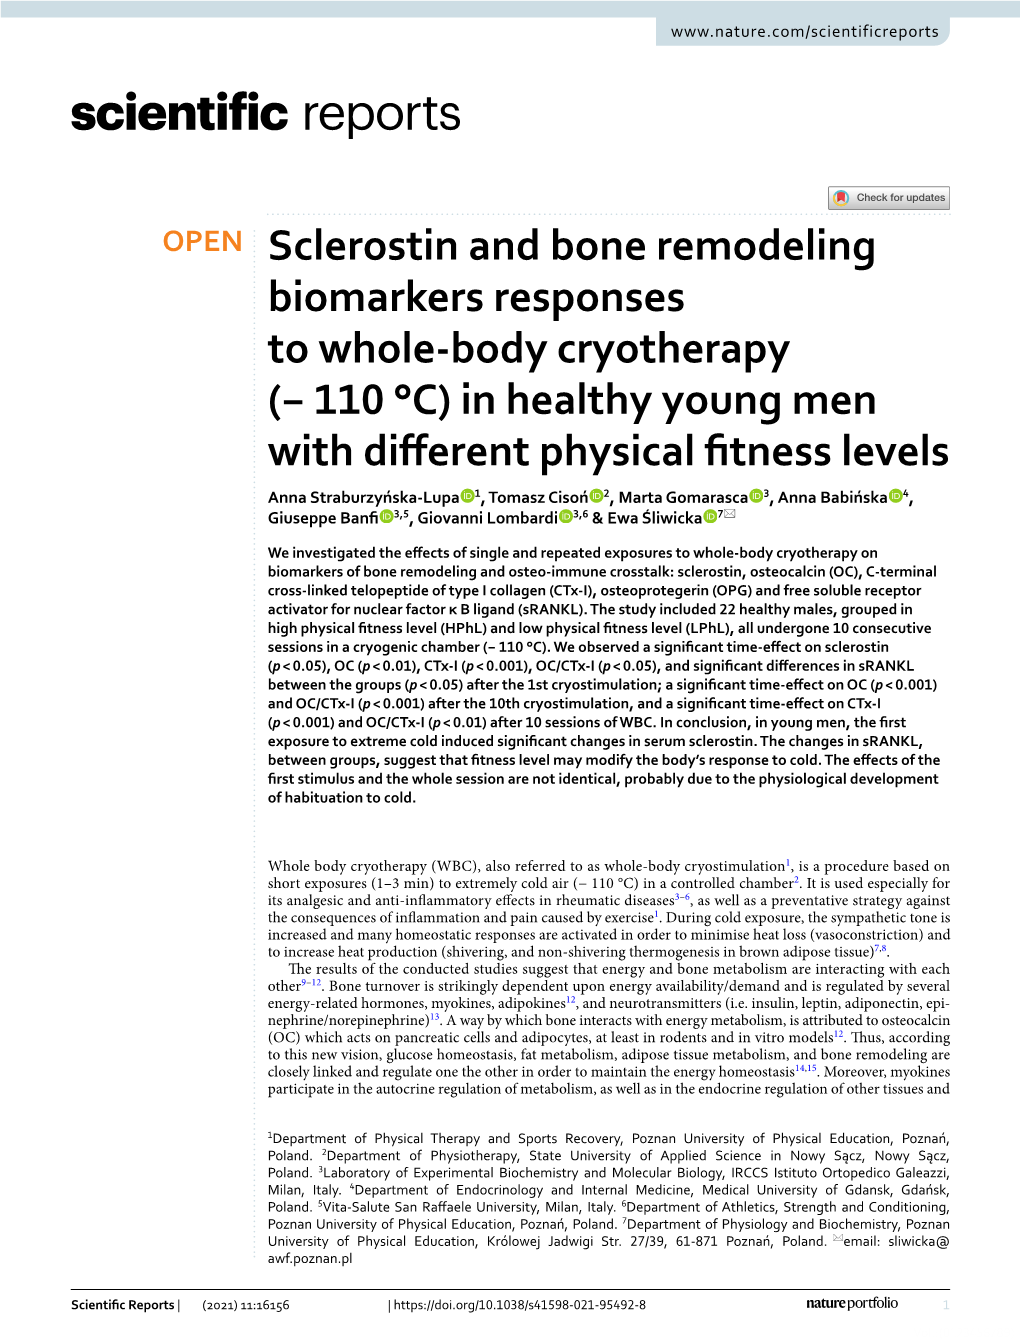 Sclerostin and Bone Remodeling Biomarkers Responses To